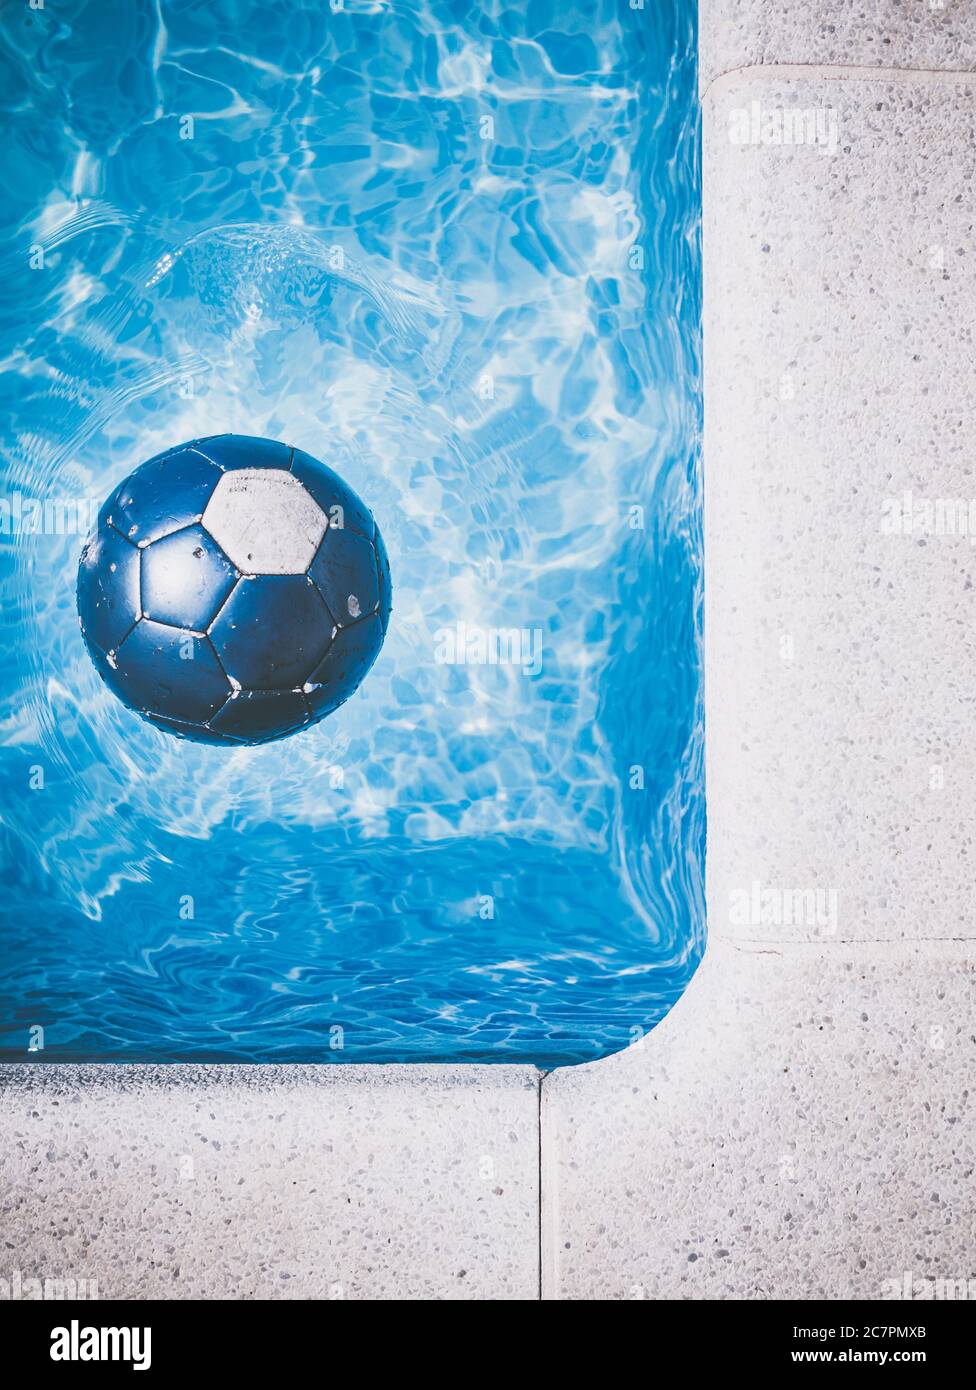 Blue soccer ball in the swimming pool Stock Photo